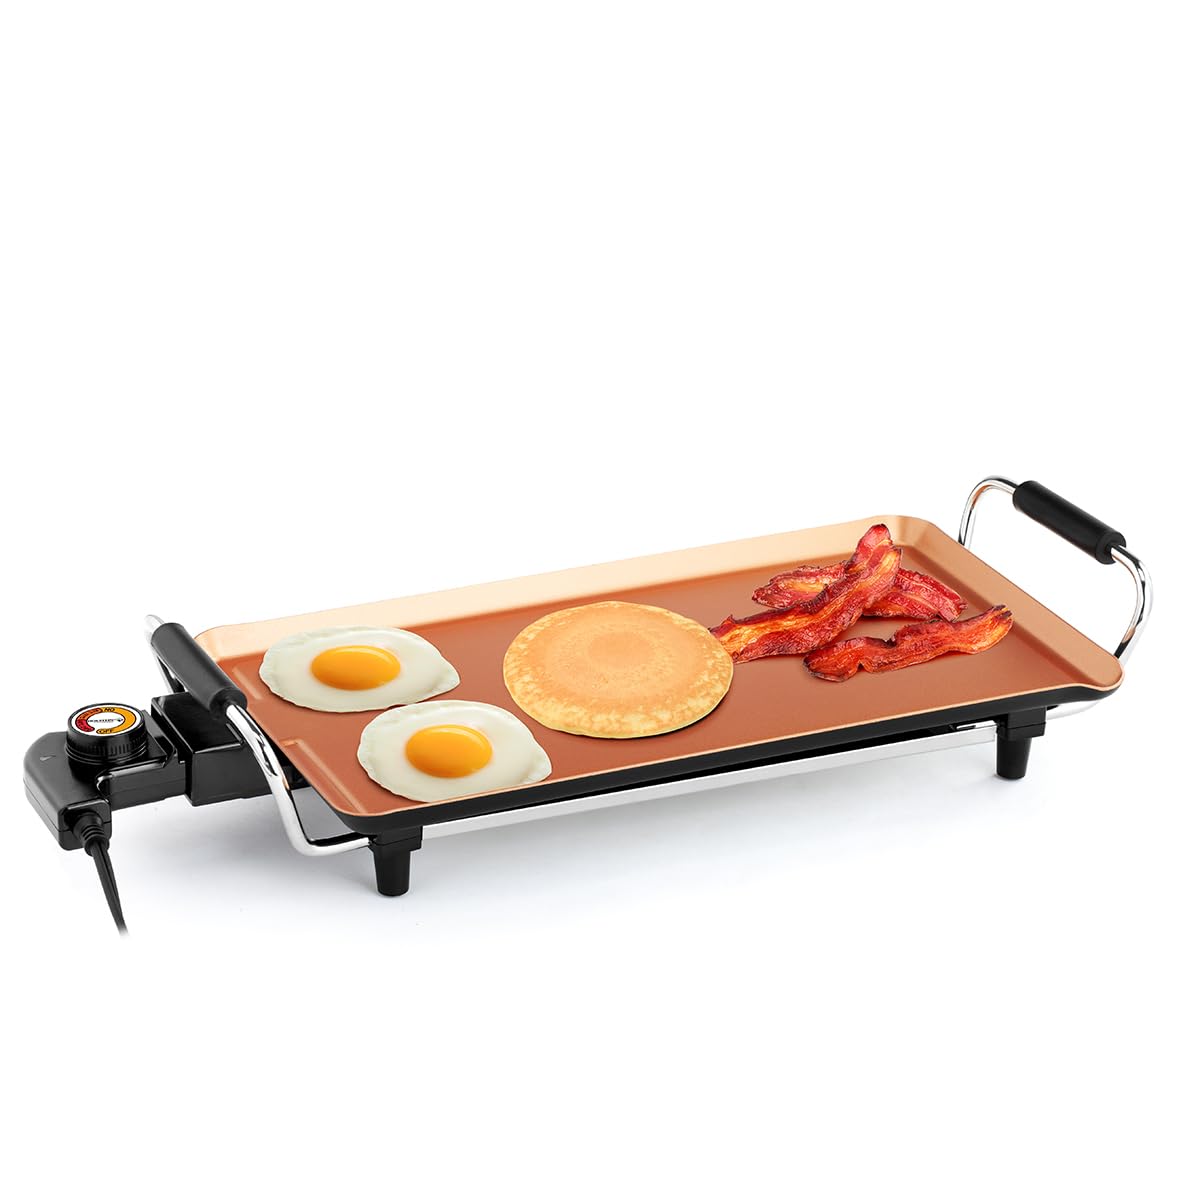 Holstein Housewares 16-Inch Electric Griddle, Healthy-Eco Non-stick Coating and Smokeless, Large Cooking Surface for Making Eggs, Chicken Chops and Ham, Multifunctional, Copper and Black Color